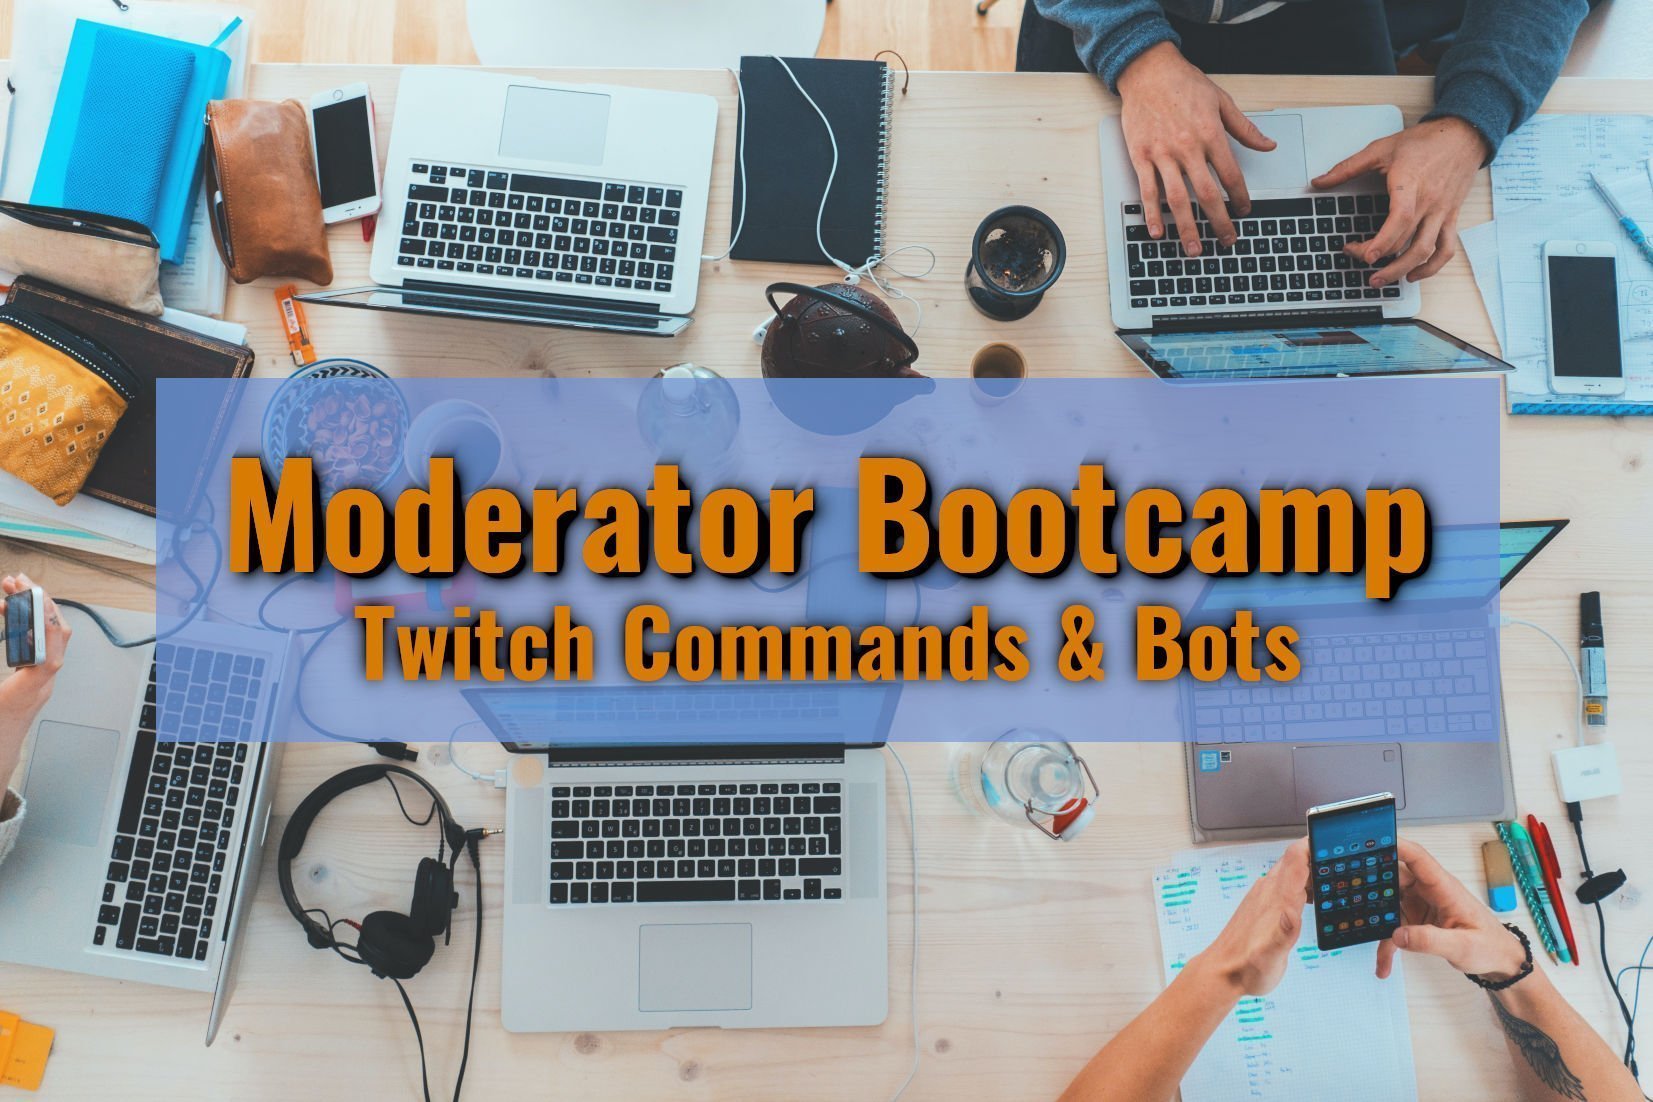 Welcome to Moderator Bootcamp – Twitch Commands & Bots